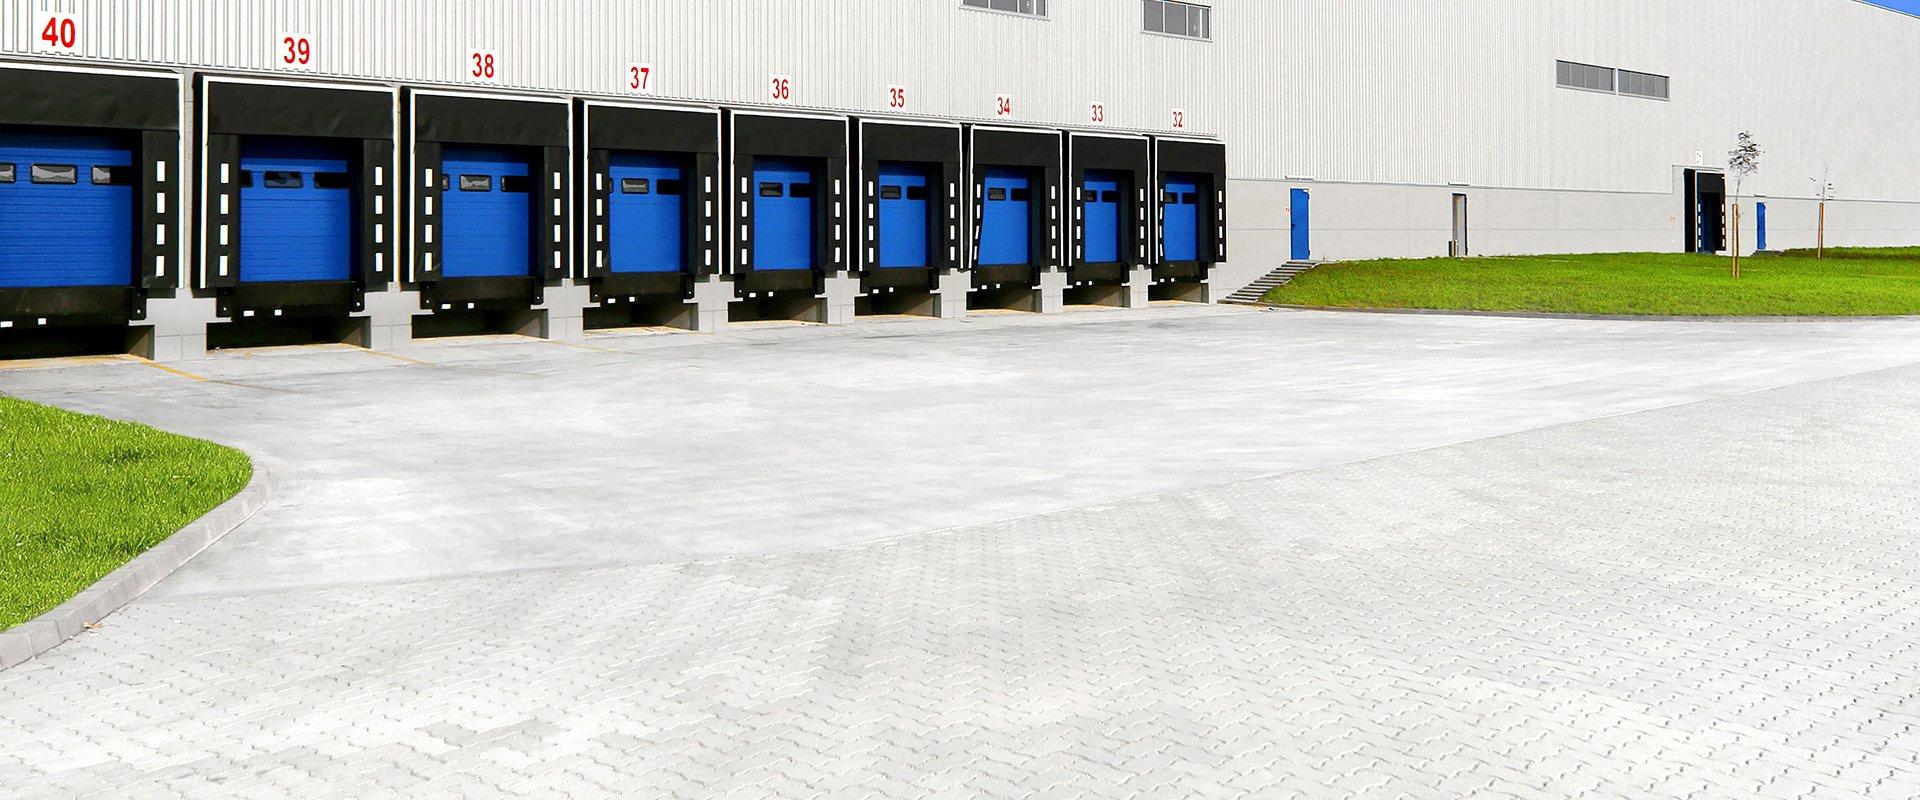 the exterior of a commercial warehouse docking station in greensboro north carolina